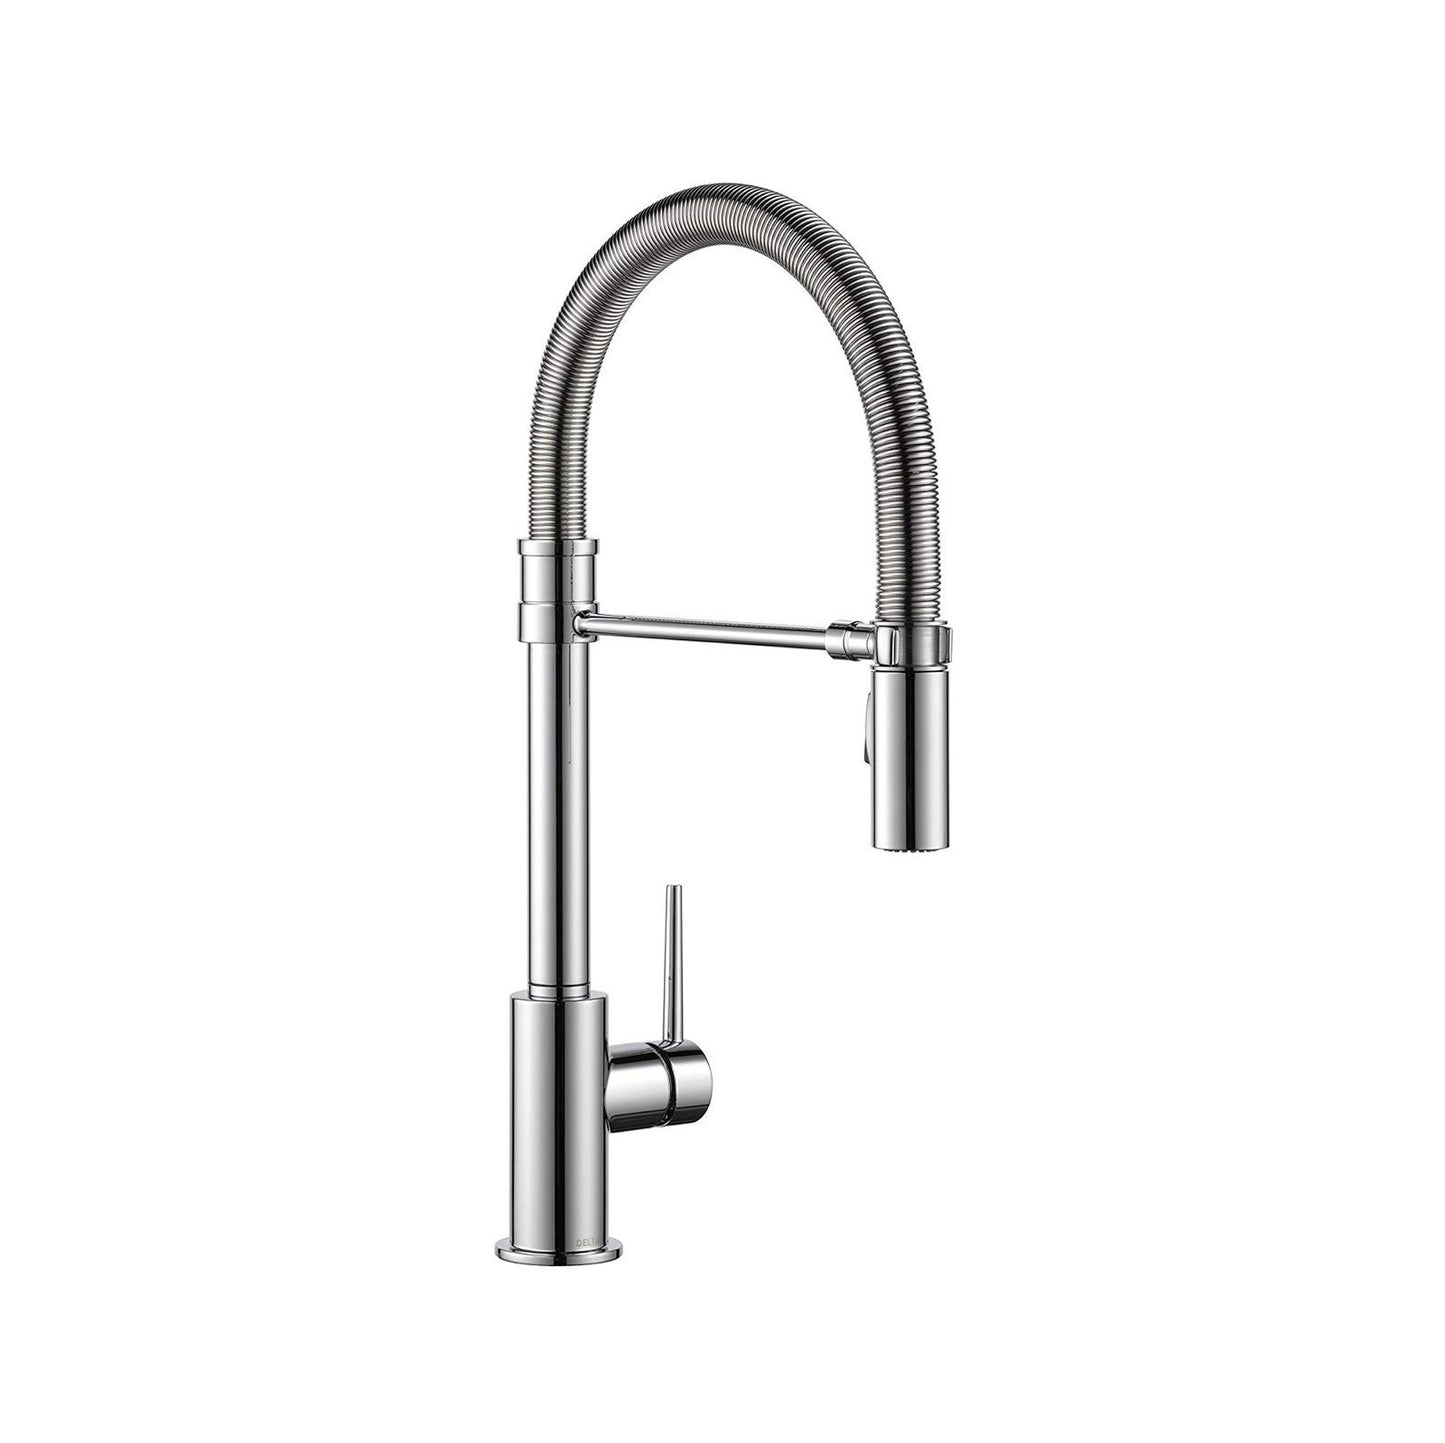 TRINSIC® PRO Single Handle Pull-Down Kitchen Faucet With Spring Spout In Chrome